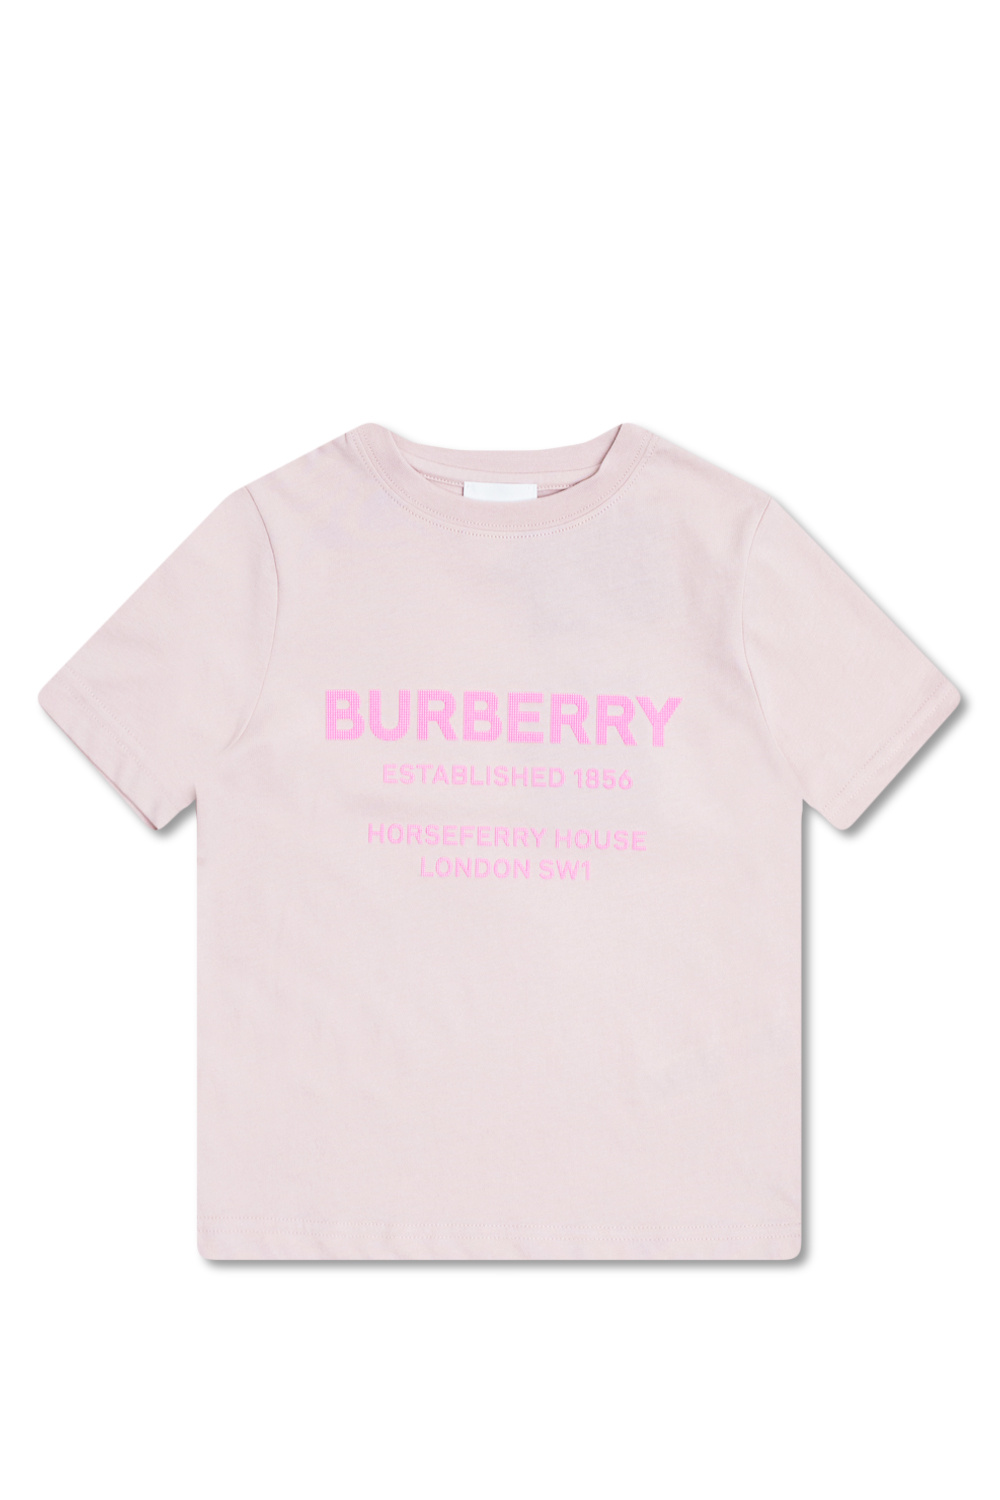 Burberry Kids T-shirt with logo | Kids's Girls clothes (4-14 years) |  IetpShops